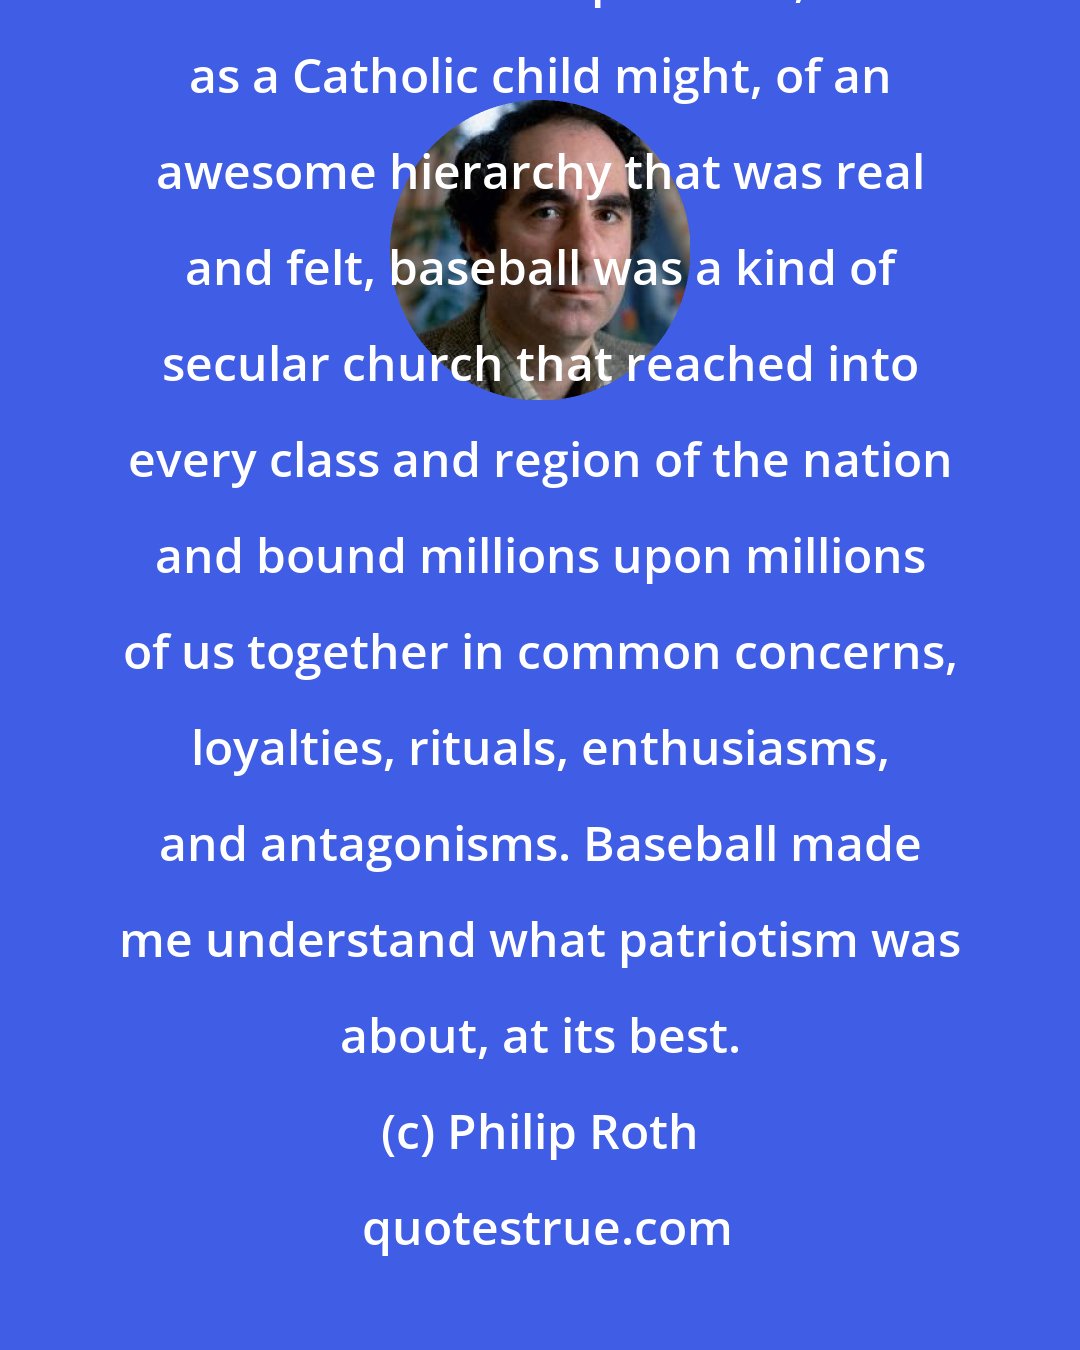 Philip Roth: For someone whose roots in America were strong but only inches deep, and who had no experience, such as a Catholic child might, of an awesome hierarchy that was real and felt, baseball was a kind of secular church that reached into every class and region of the nation and bound millions upon millions of us together in common concerns, loyalties, rituals, enthusiasms, and antagonisms. Baseball made me understand what patriotism was about, at its best.